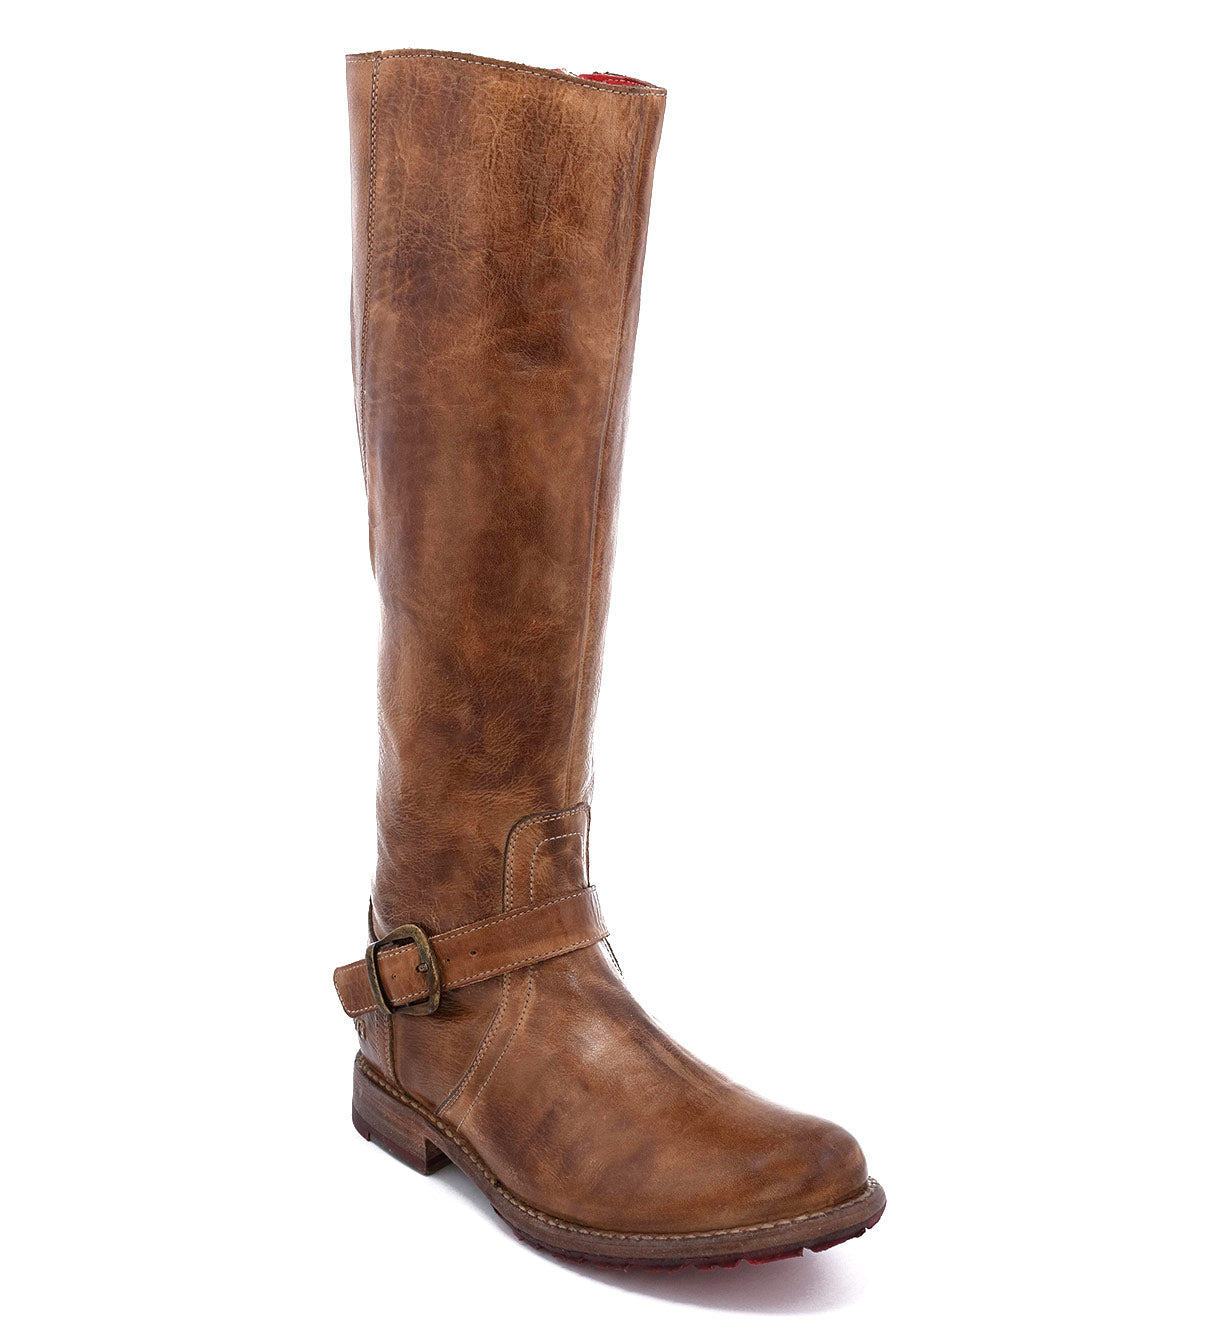 A women's brown Glaye riding boot with buckles and straps, from the brand Bed Stu.